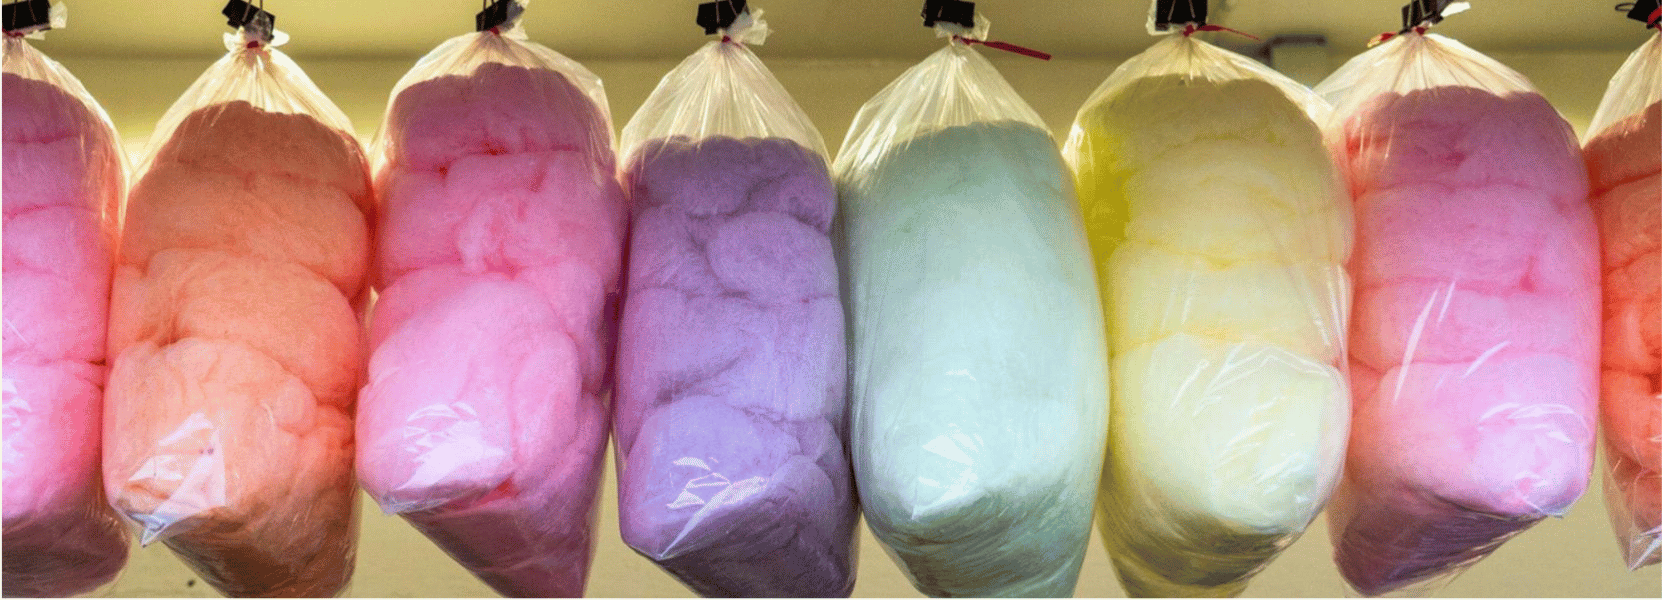 Cotton candy in bags